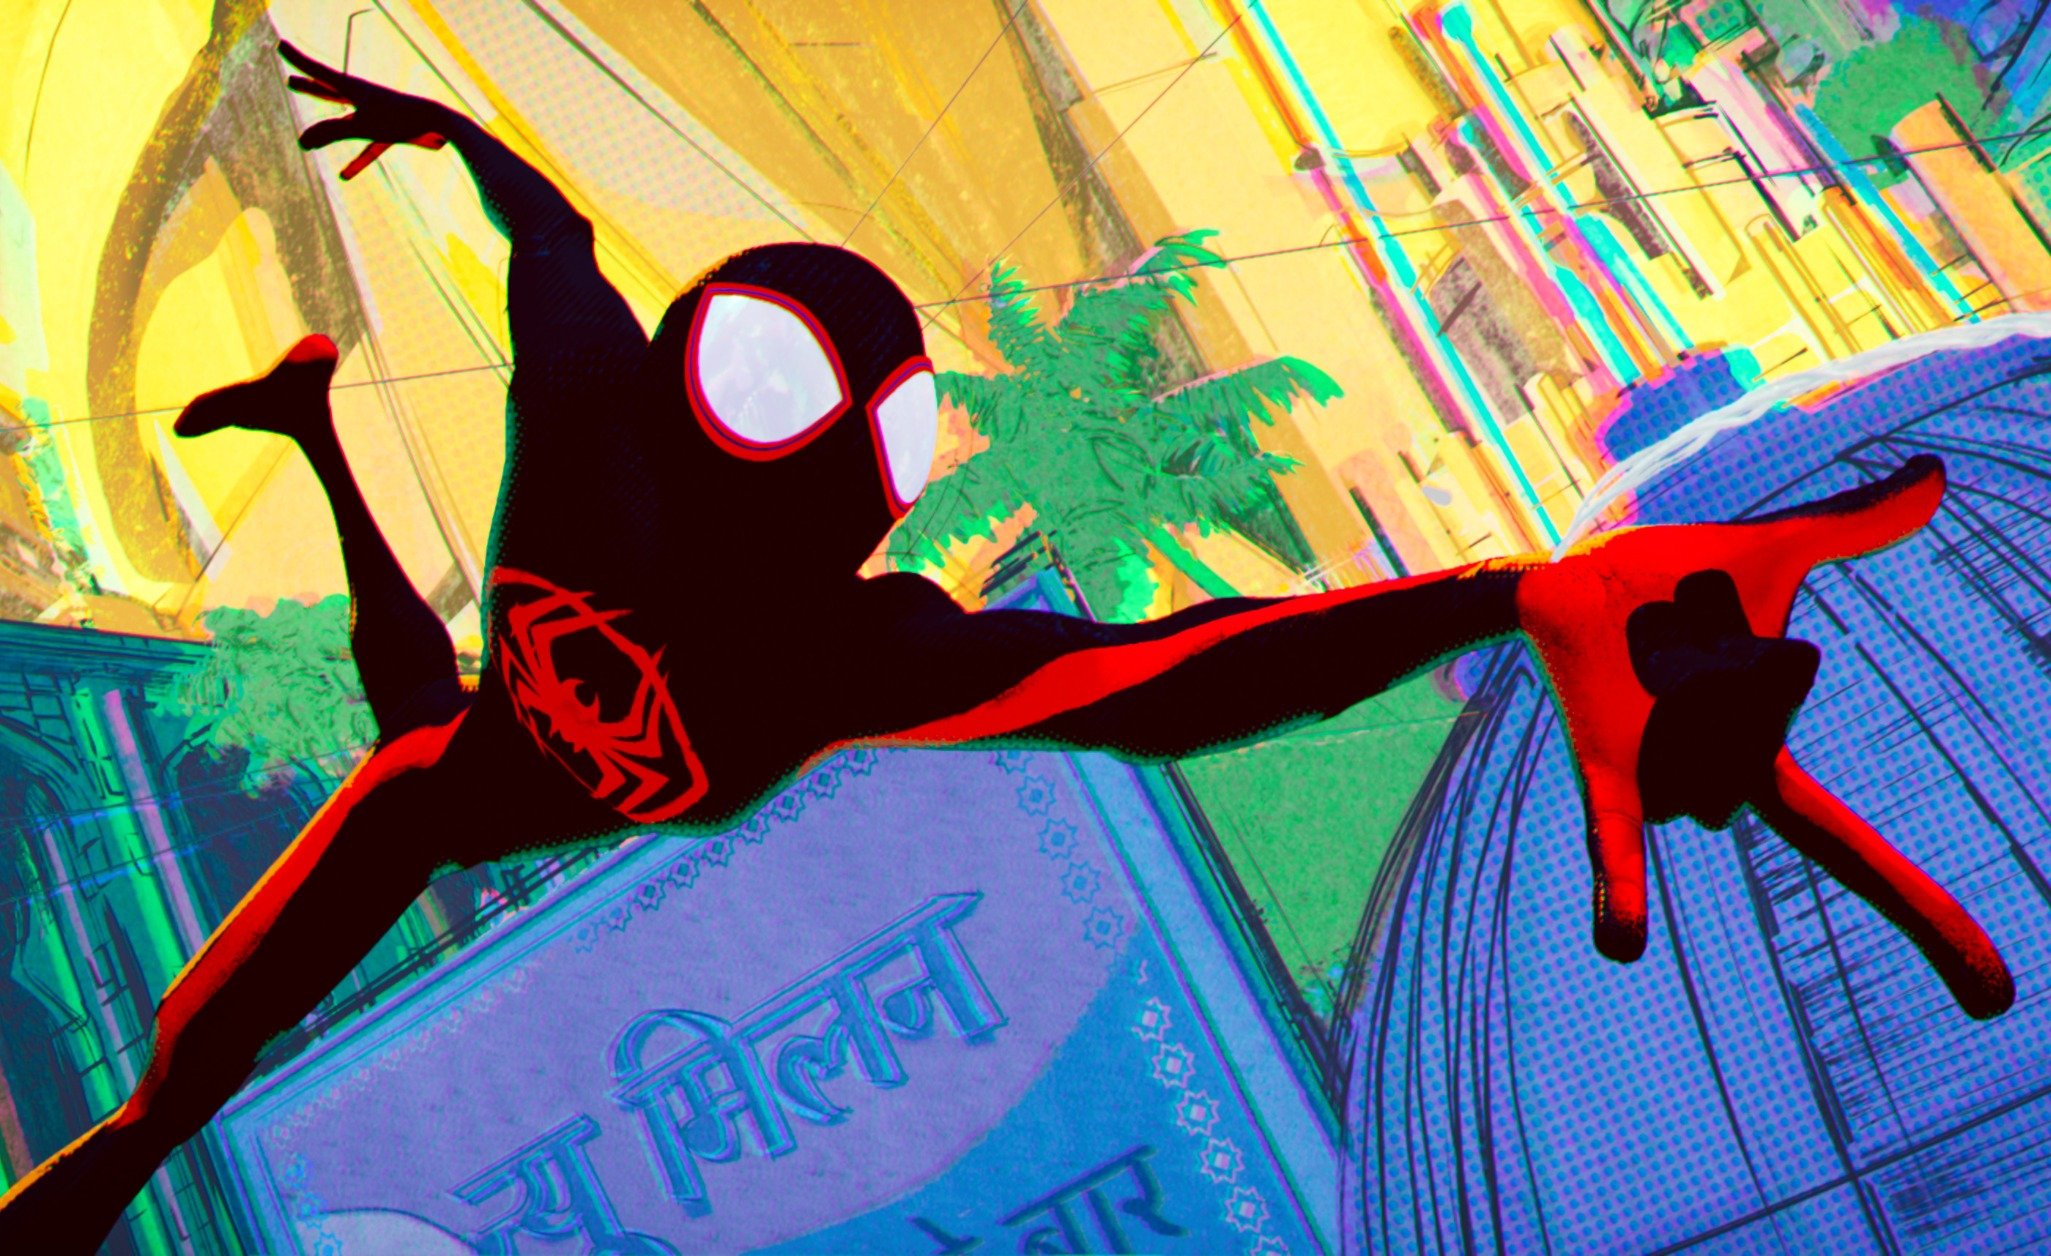 Miles Morales web-slinging through the multiverse in the trailer for 'Spider-Man: Across the Spider-Verse' Part 1